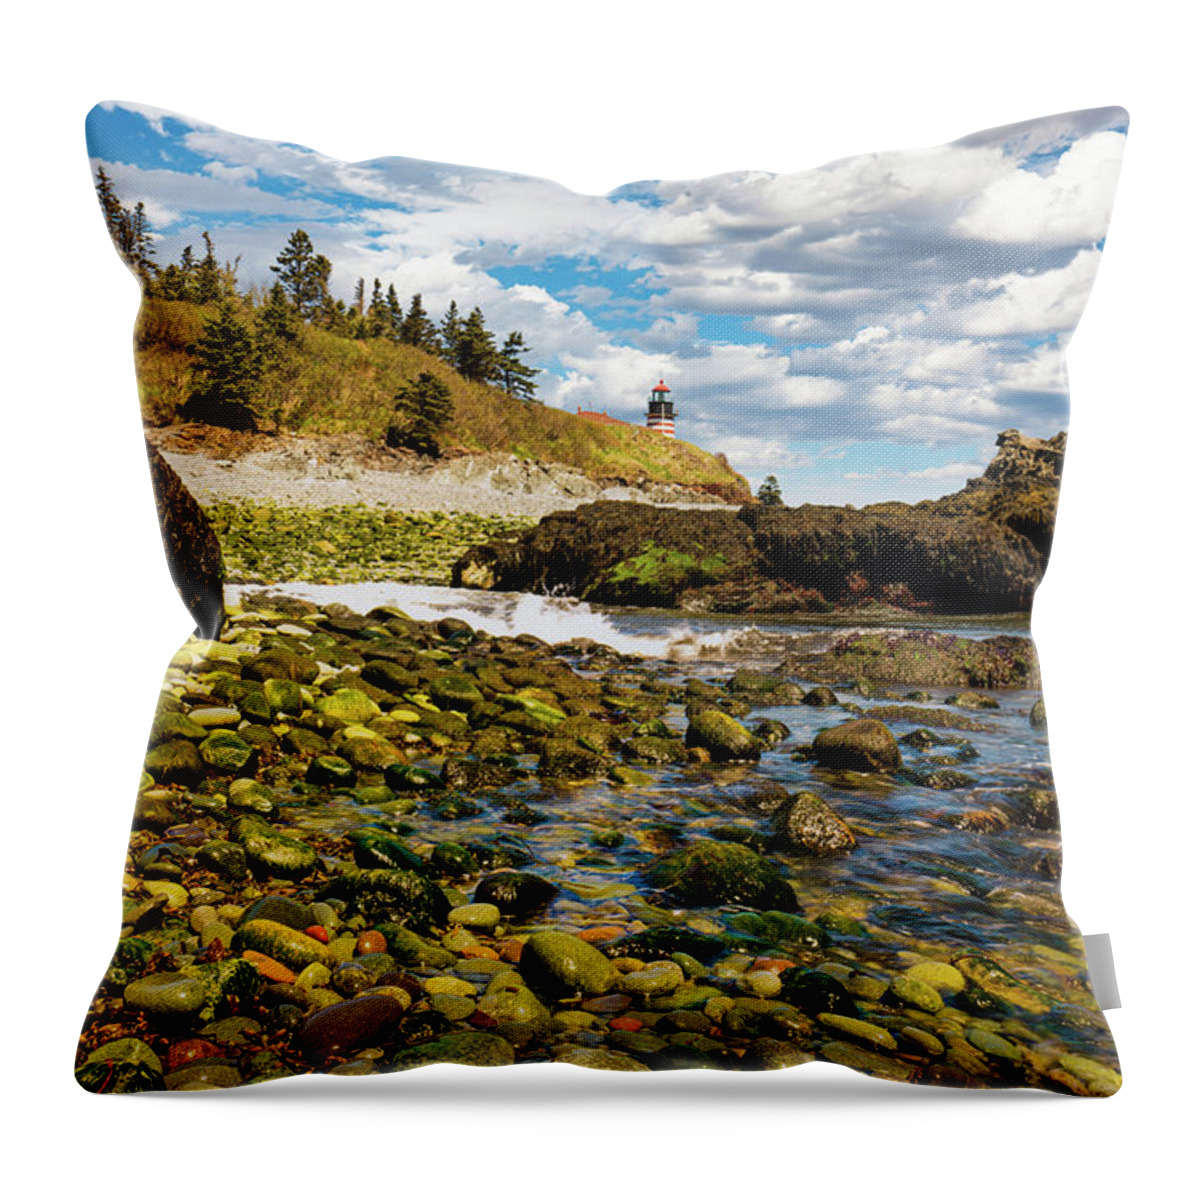 West Quoddy Head Throw Pillow featuring the photograph West Quoddy Head Seascape by Ron Long Ltd Photography